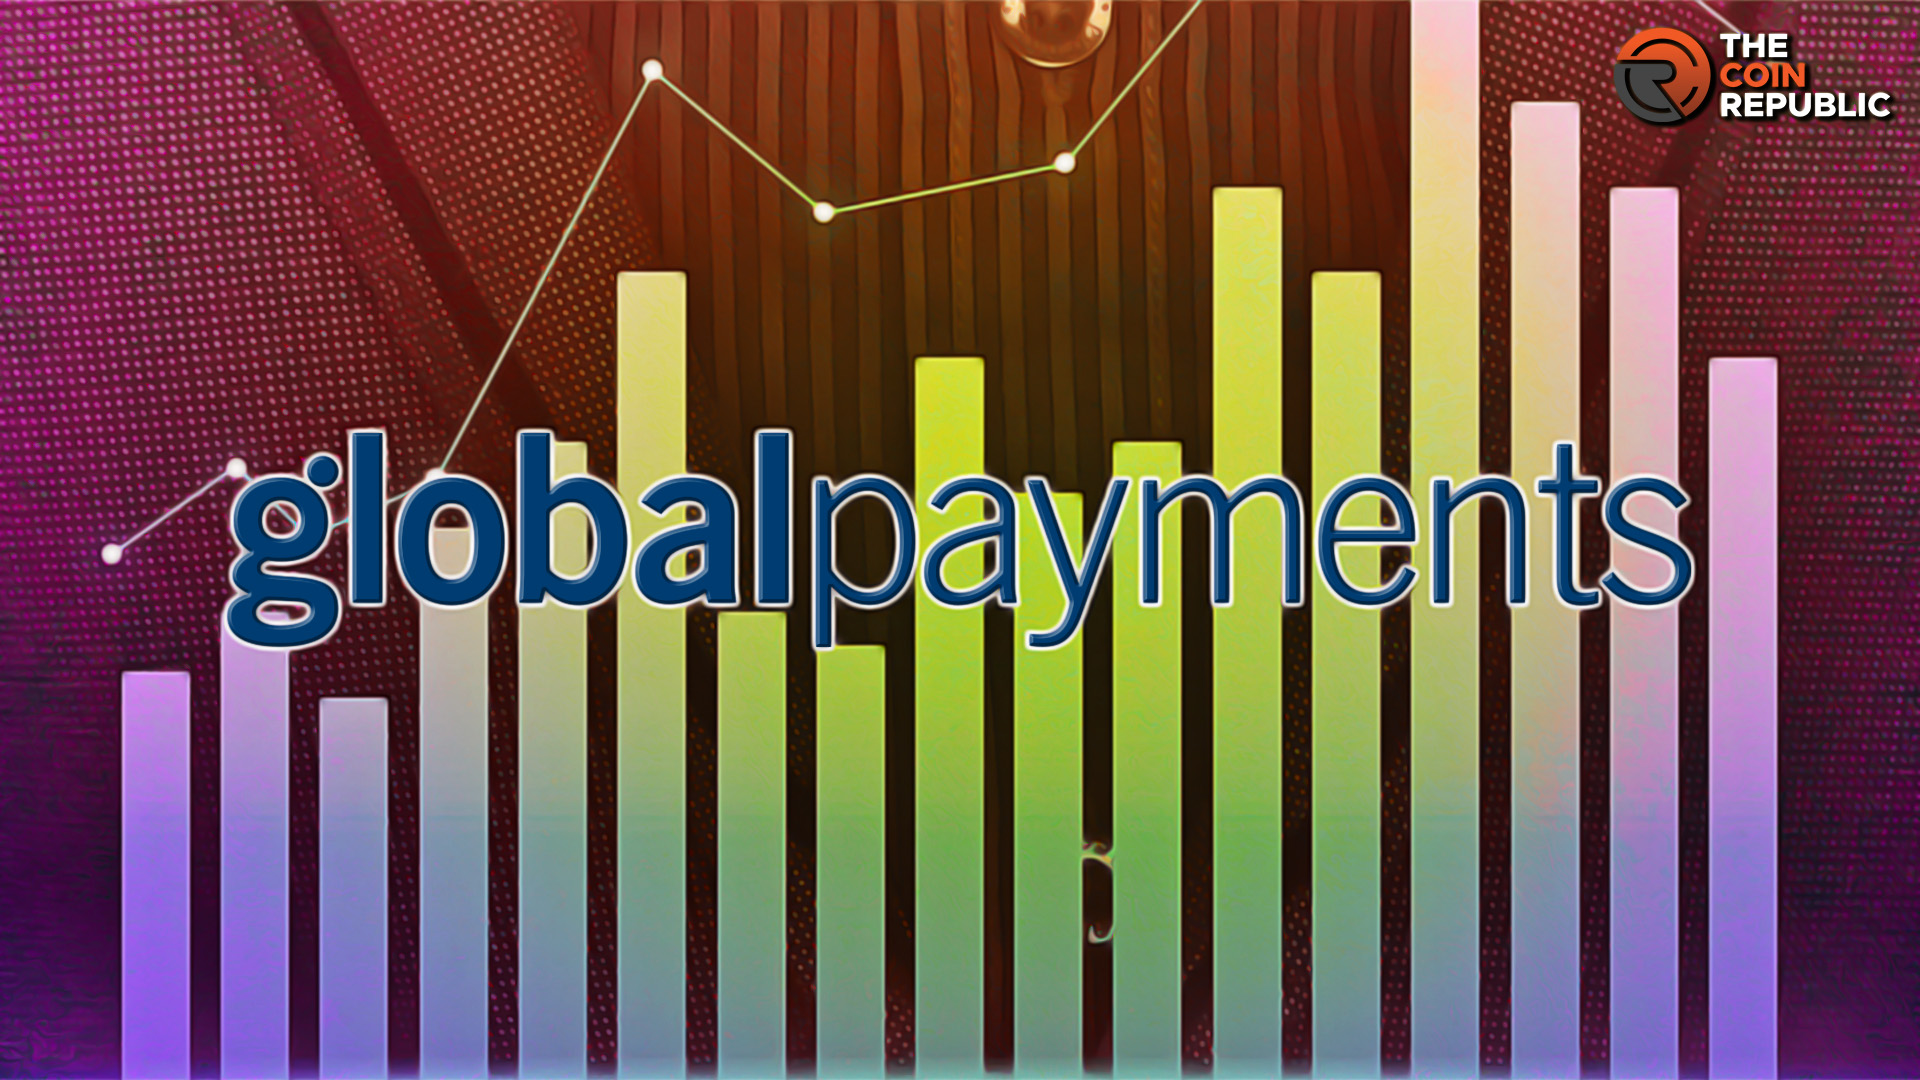 Will Global Payments Inc. (GPN Stock) Rebound From 200-Day EMA?